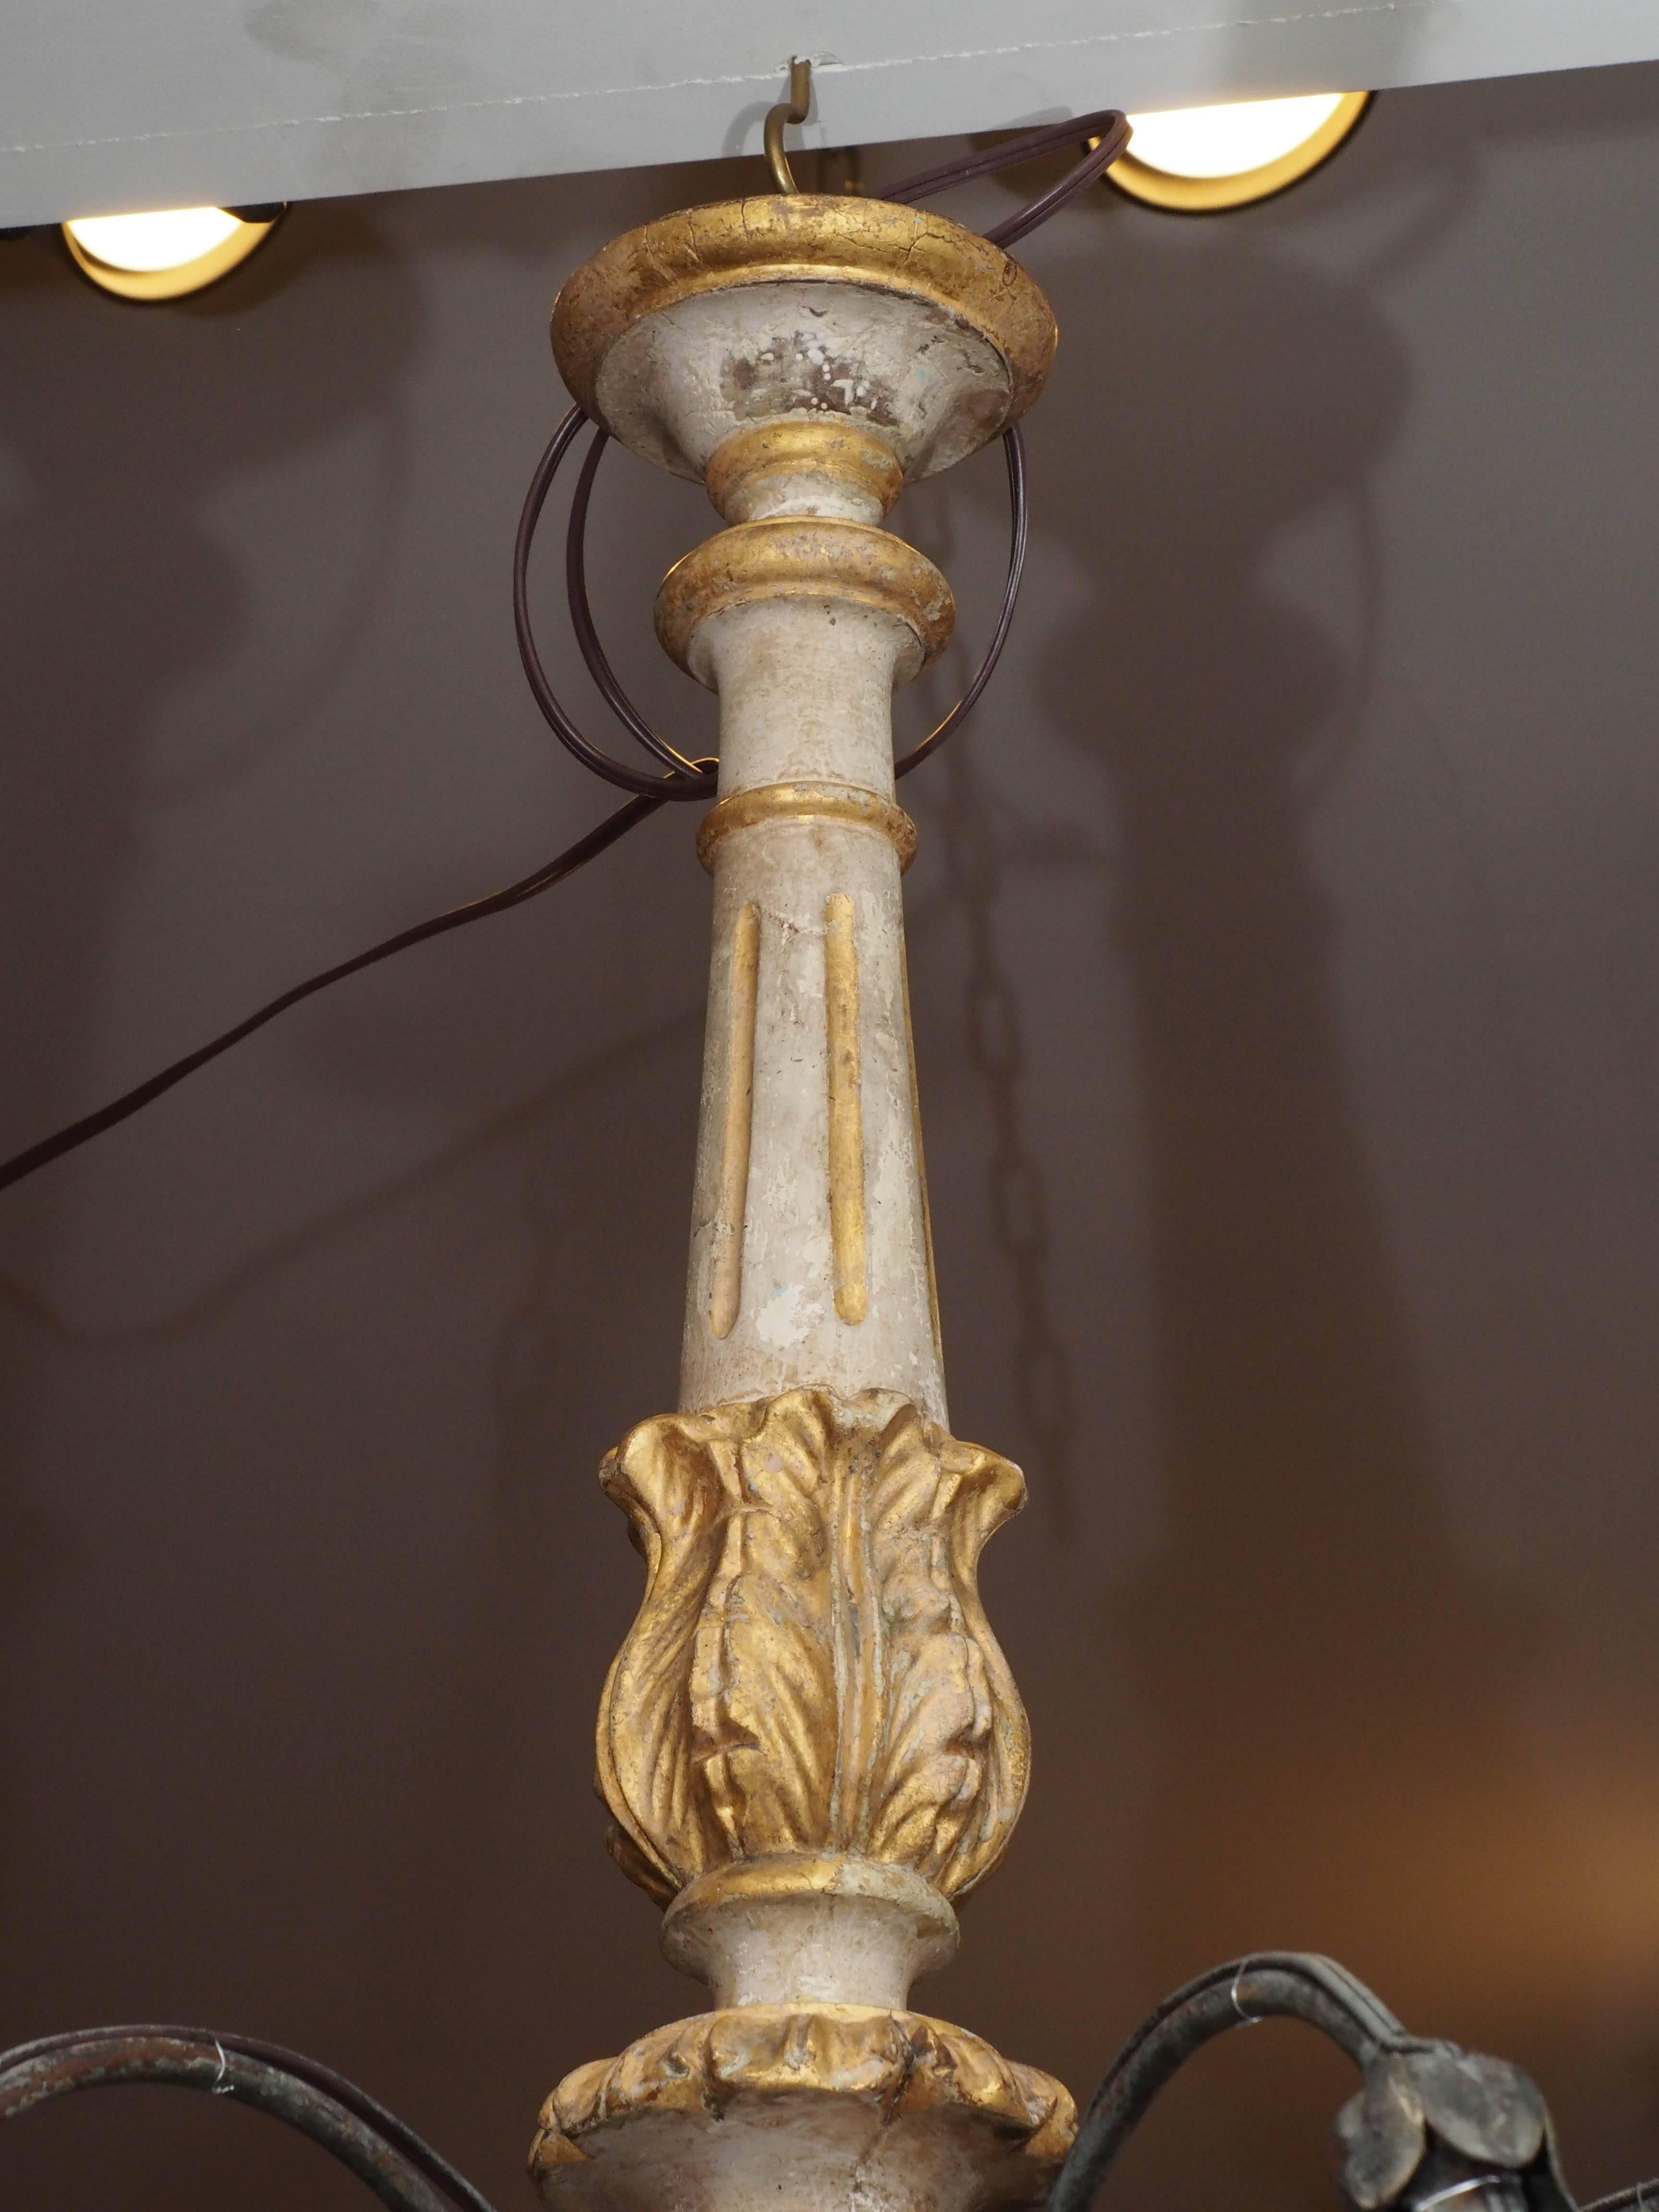 Italian painted and parcel-gilt wooden stemmed eight-light chandelier from Tuscany area. Iron arms. Has been re wired. No guarantee of this wiring after transport. Please have it checked. All chandeliers come with canopy and chain and real beeswax